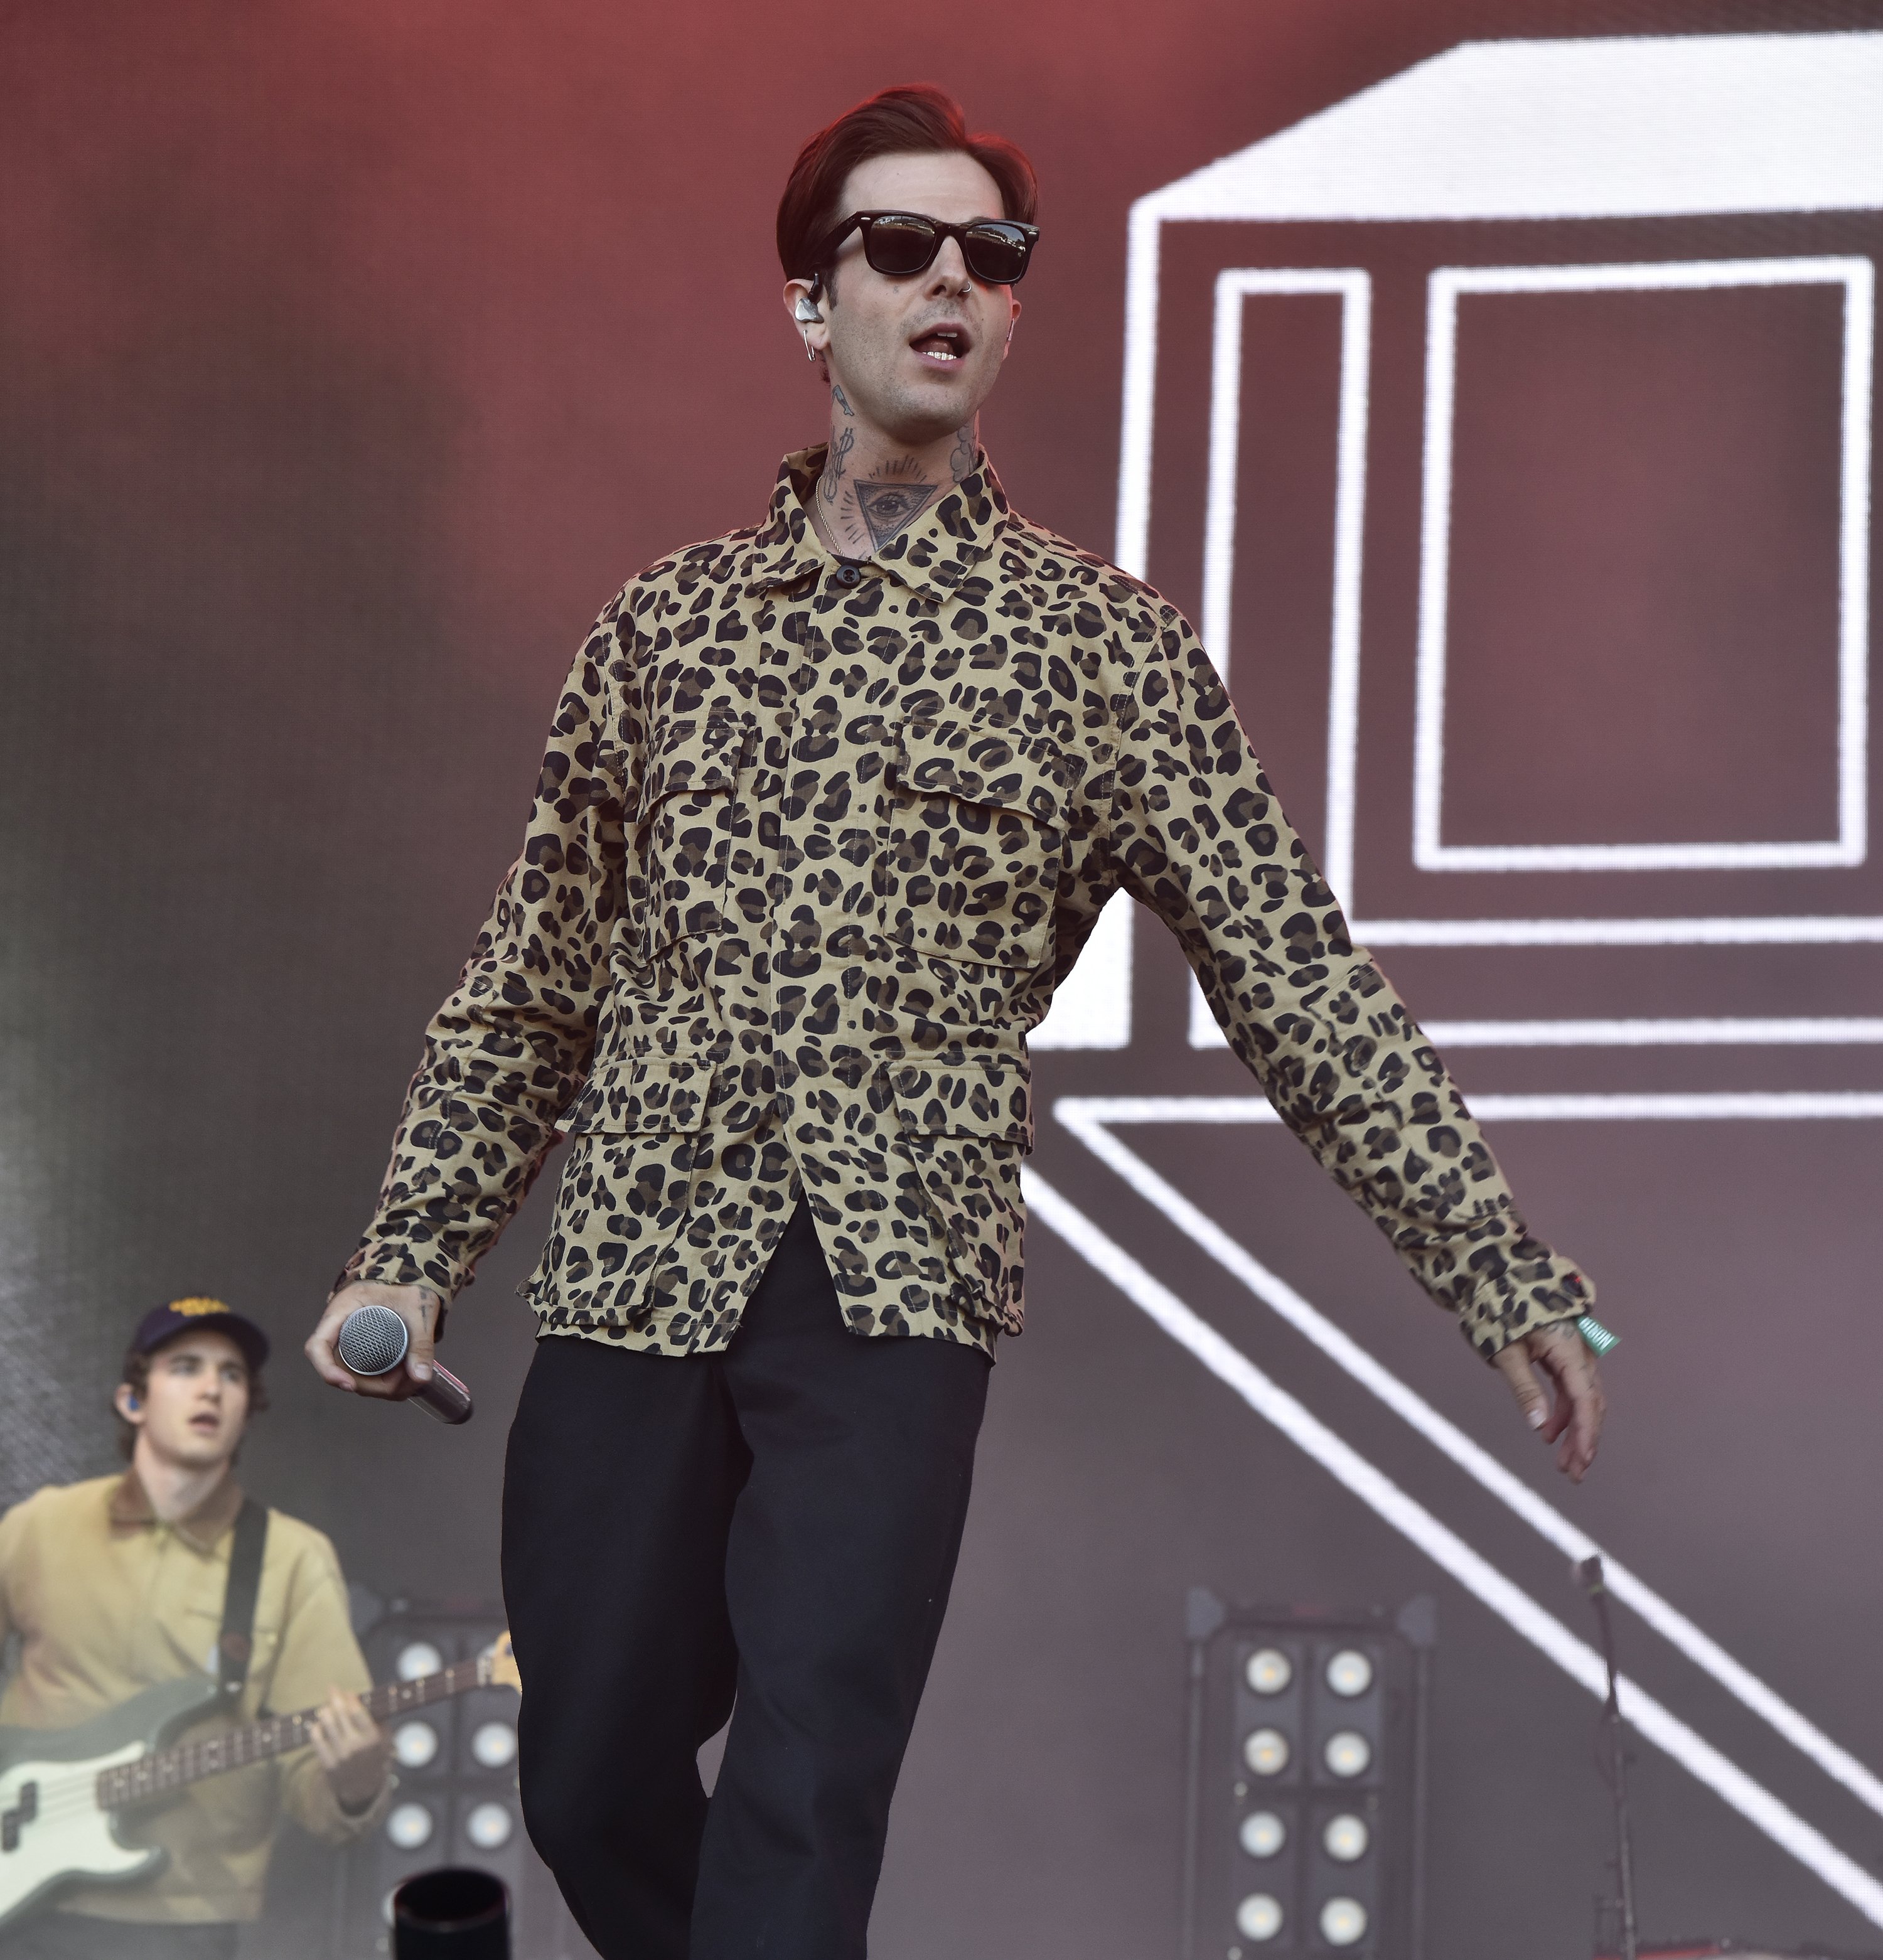 Jesse Rutherford of The Neighbourhood performing at the 2019 Outside Lands music festival in San Francisco, California on August 09, 2019 | Source: Getty Images